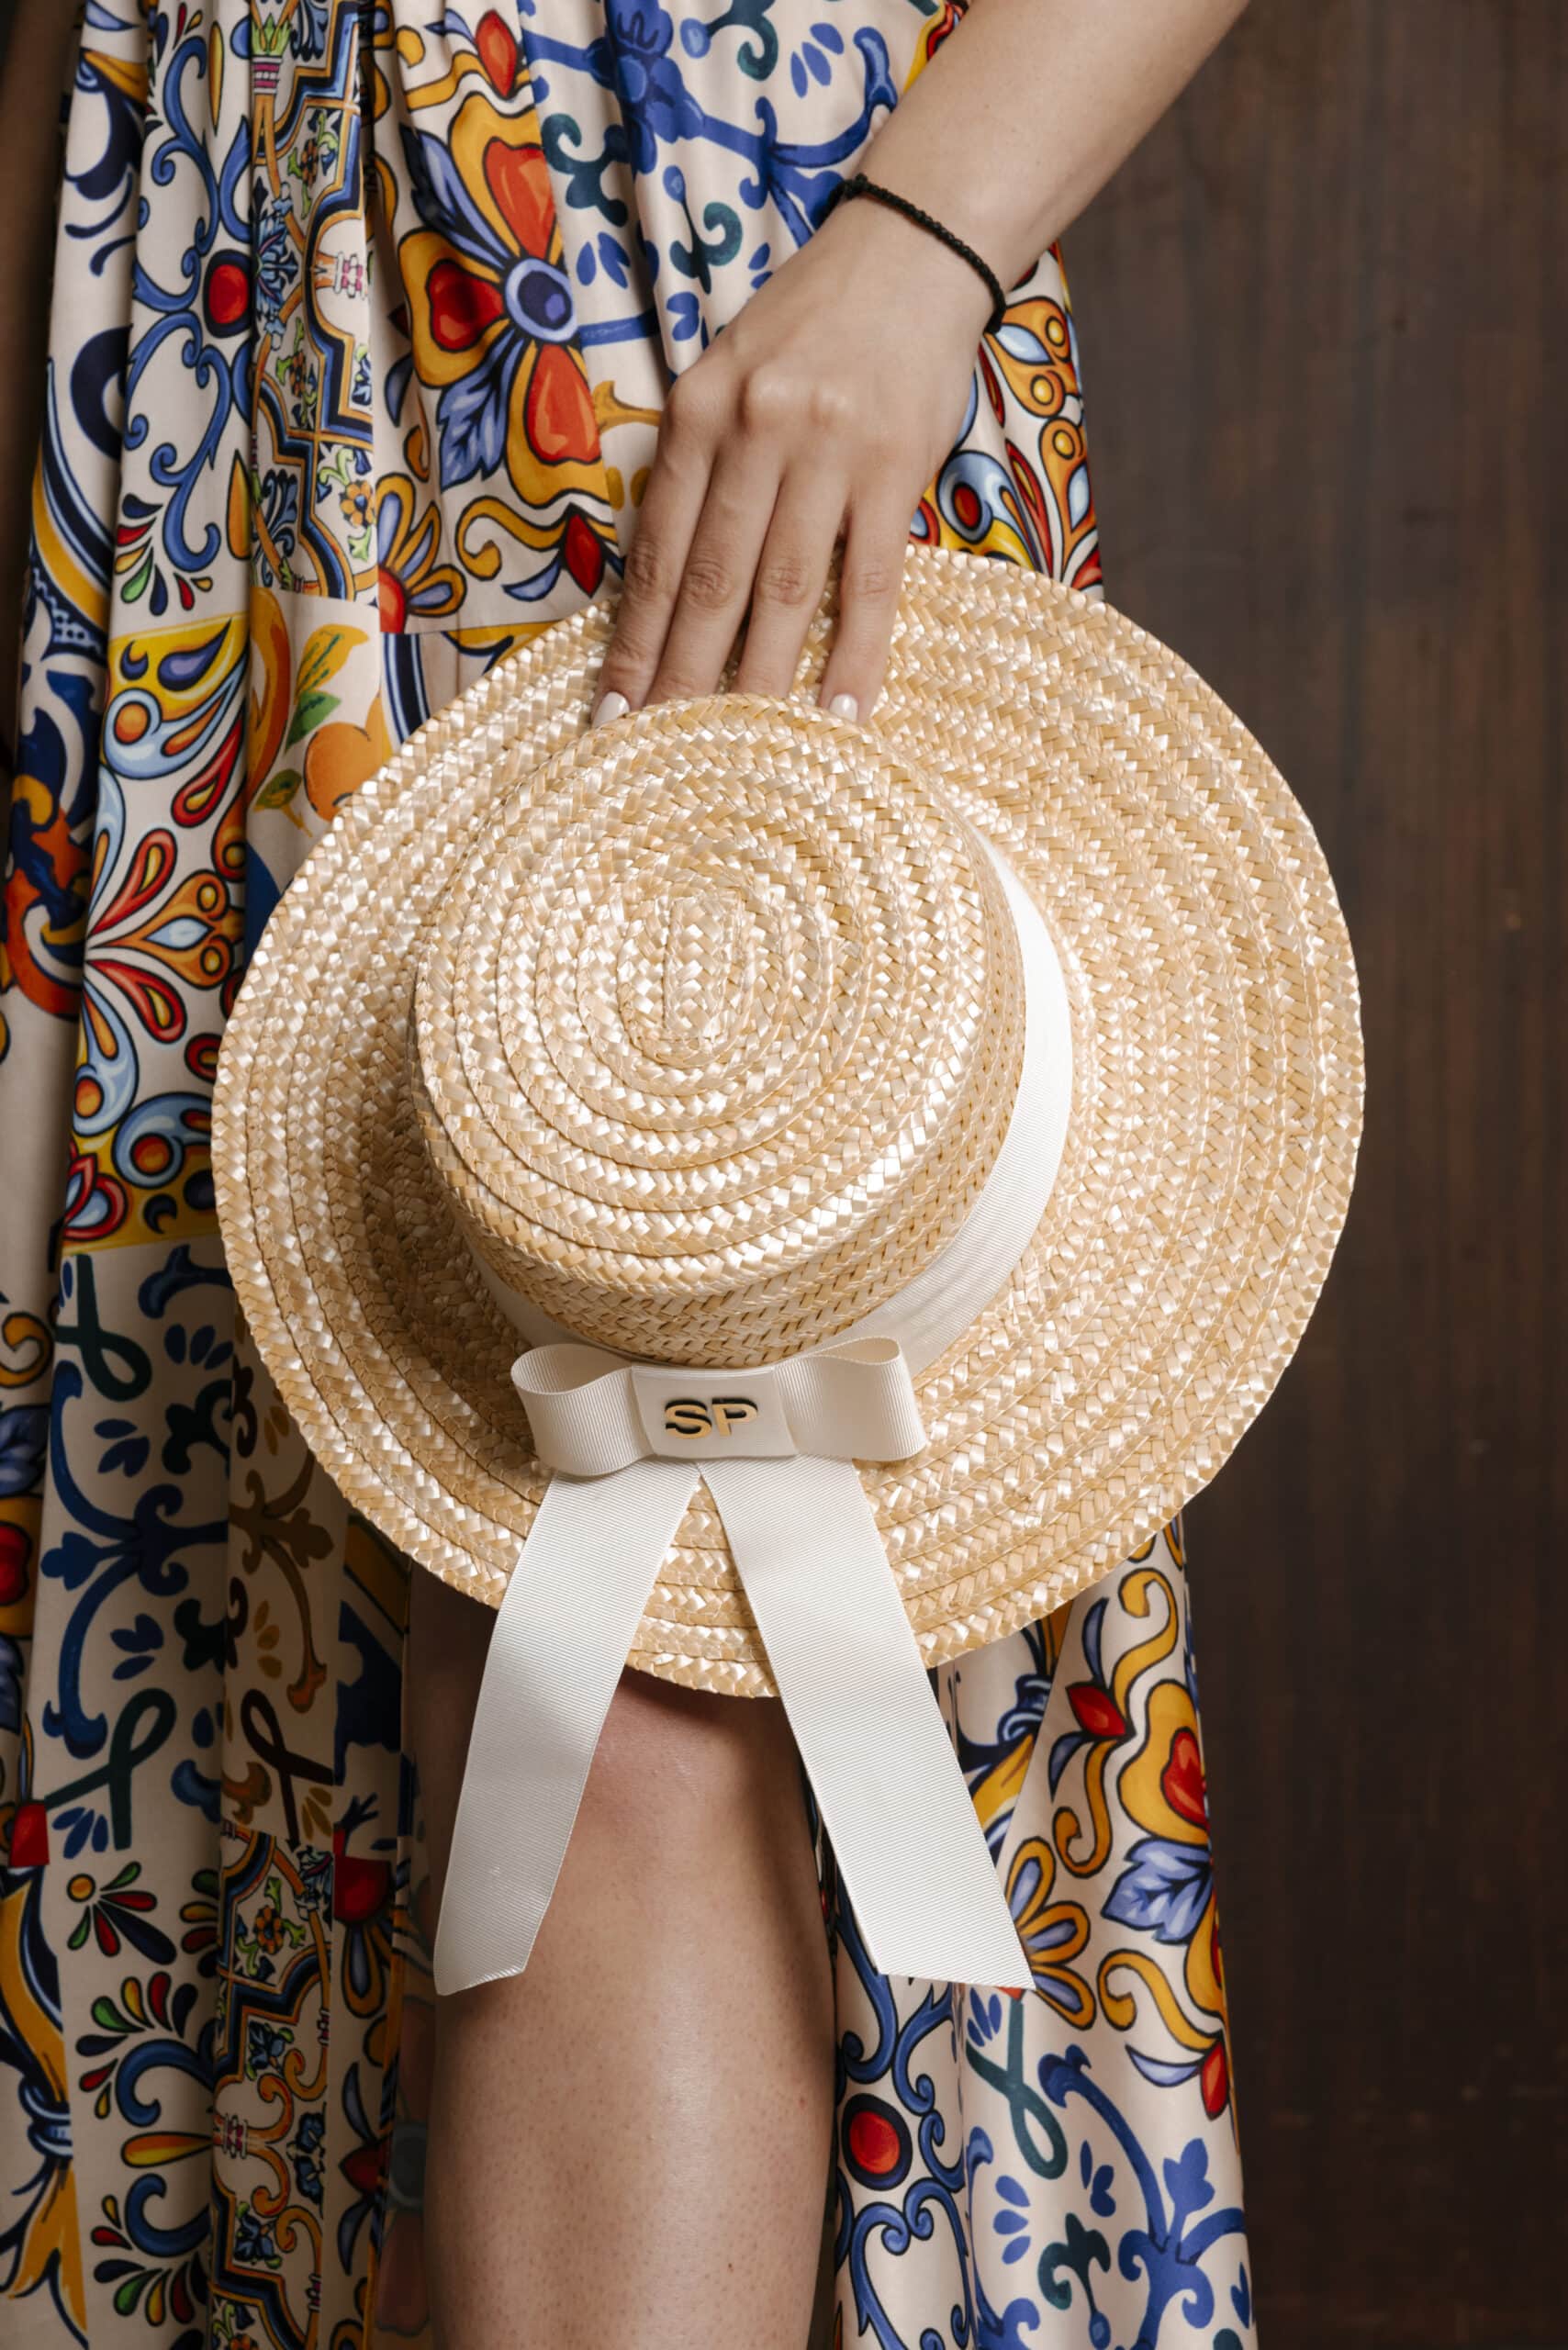 Summer fashion hat  with SP details and a gift box